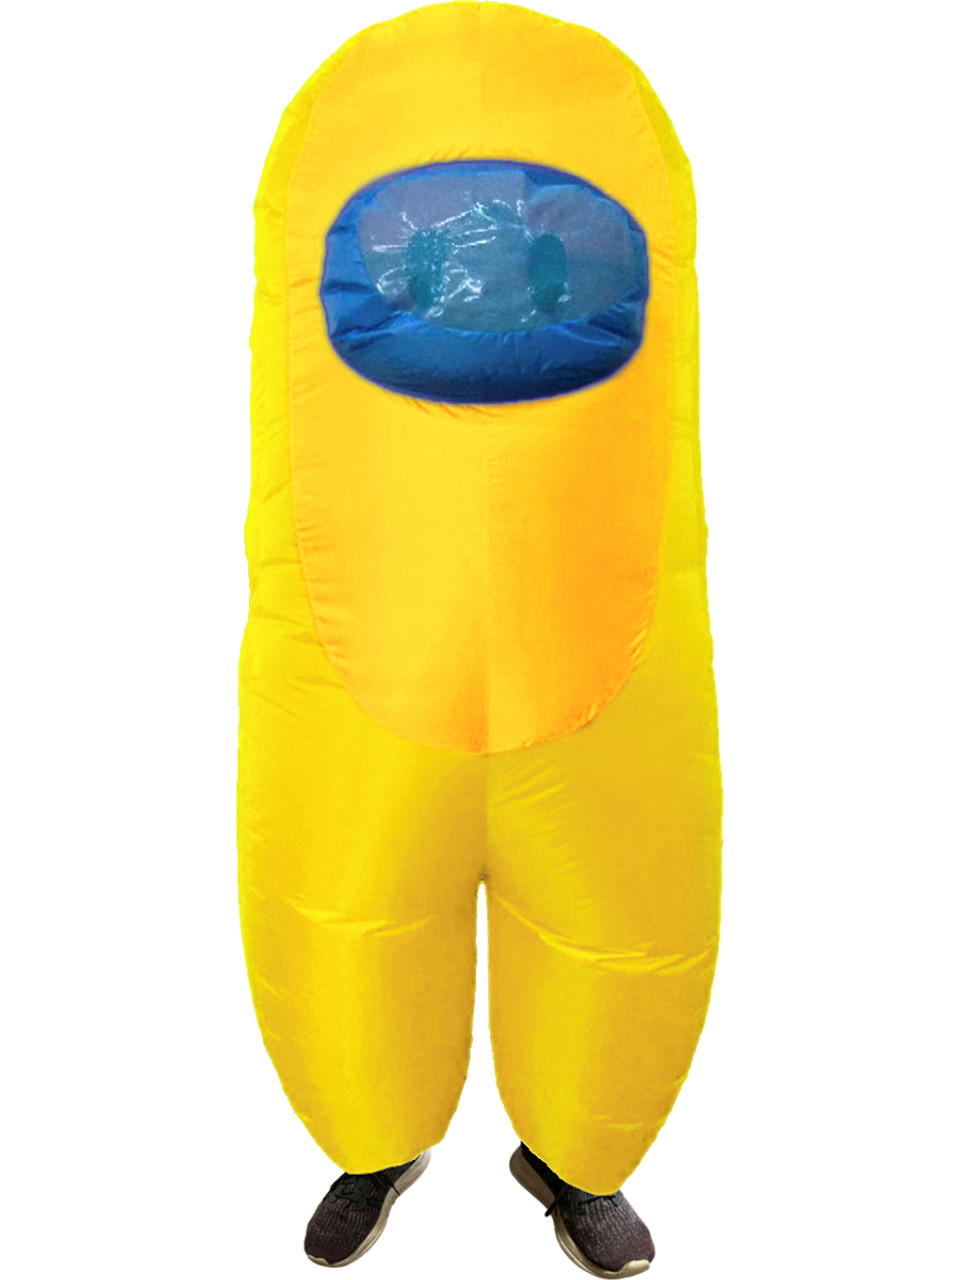 Adult Yellow Amongst Us Sus Imposter Crewmate Killer Inflatable Costume -  BlockBuster Costumes